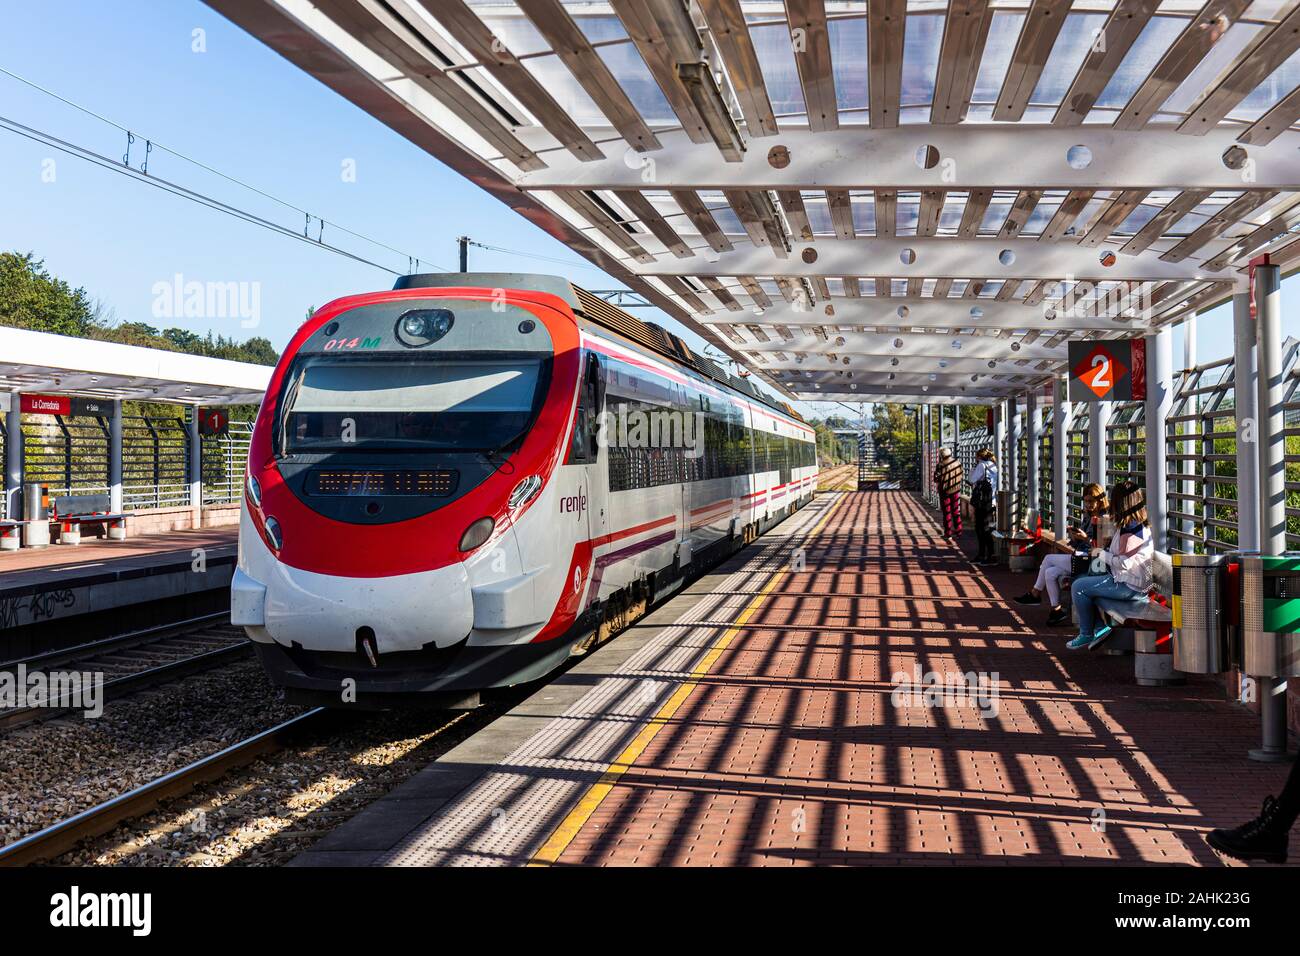 A modern Commuter train arriving at train station at Urb. Pintado,, Oviedo Spain - Stock Photo